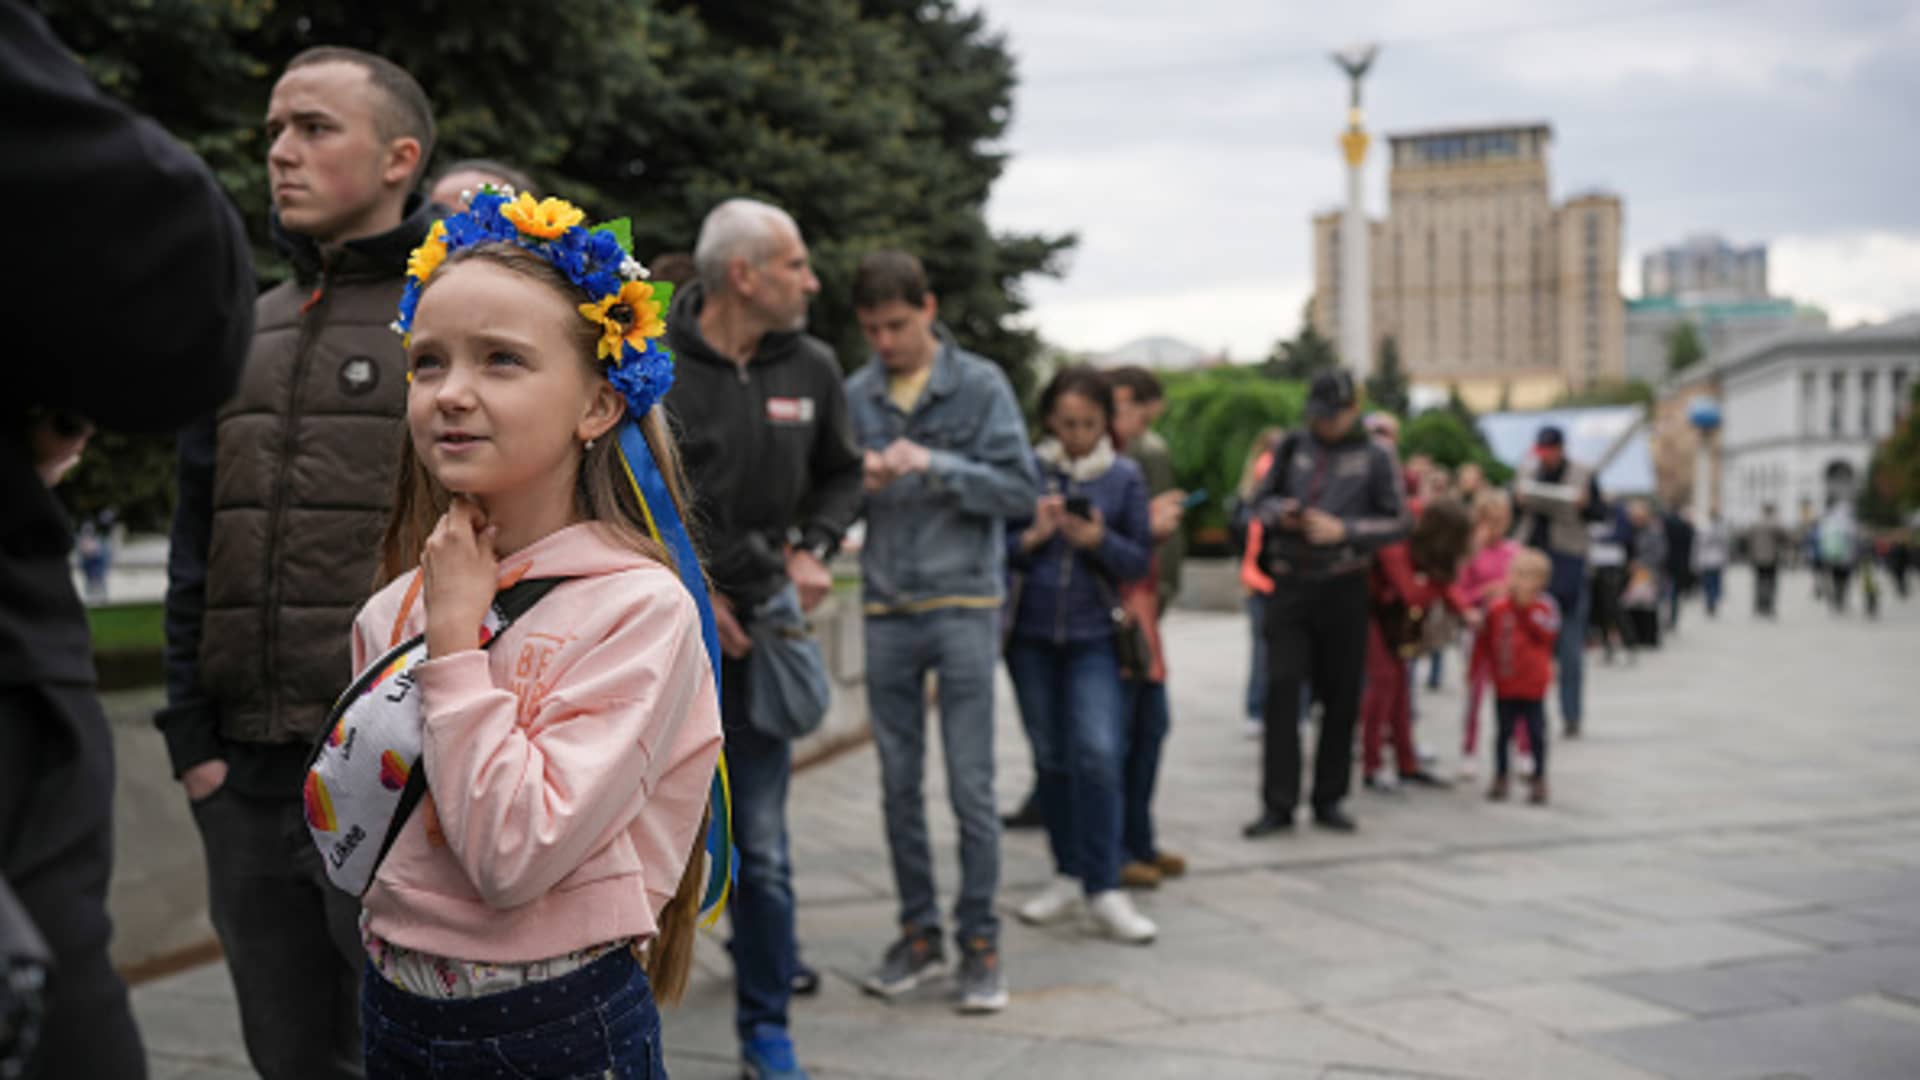 Hundreds of people queue at Kyiv central post office for a new Ukrainian postal service stamp marking the sinking of Russian warship Moskva on May 23, 2022 in Kyiv, Ukraine.